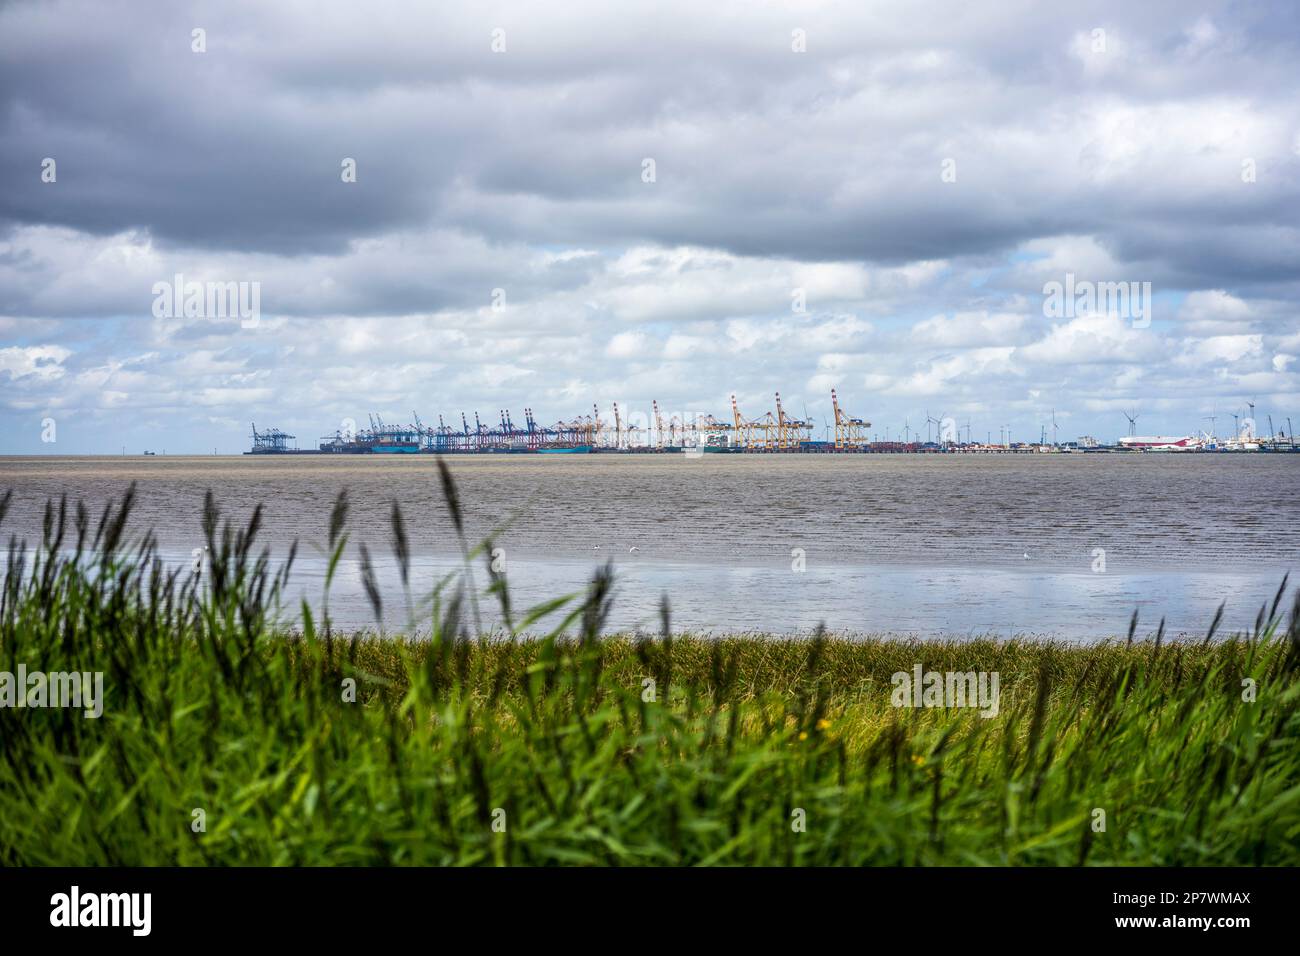 Bremerhaven container port as seen from Nordenham Blexen, Germany 2022. Stock Photo